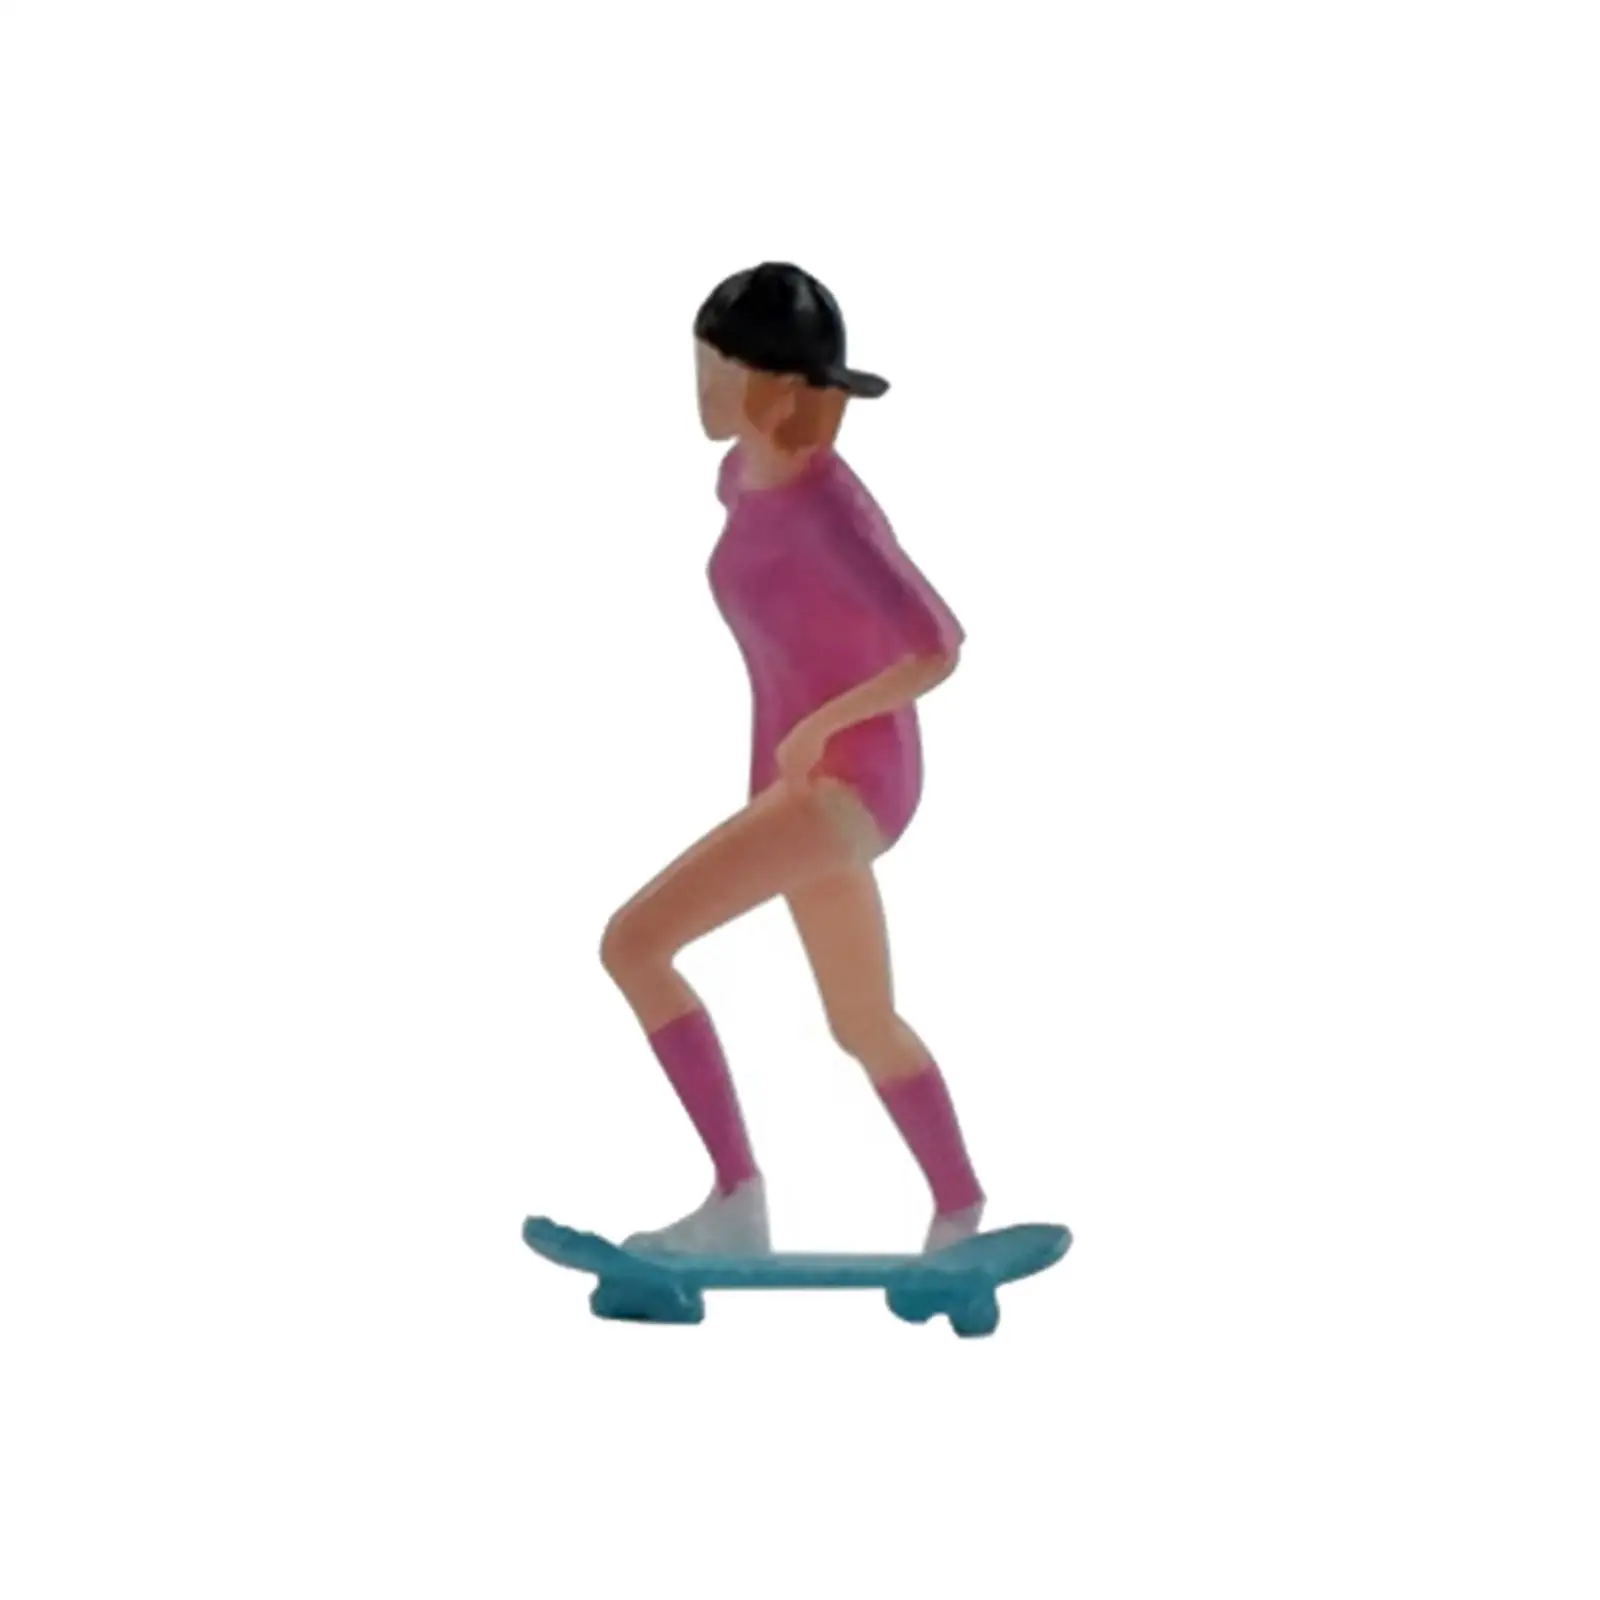 1/64 Scale People Figurines Skateboard Girl People for DIY Projects Layout